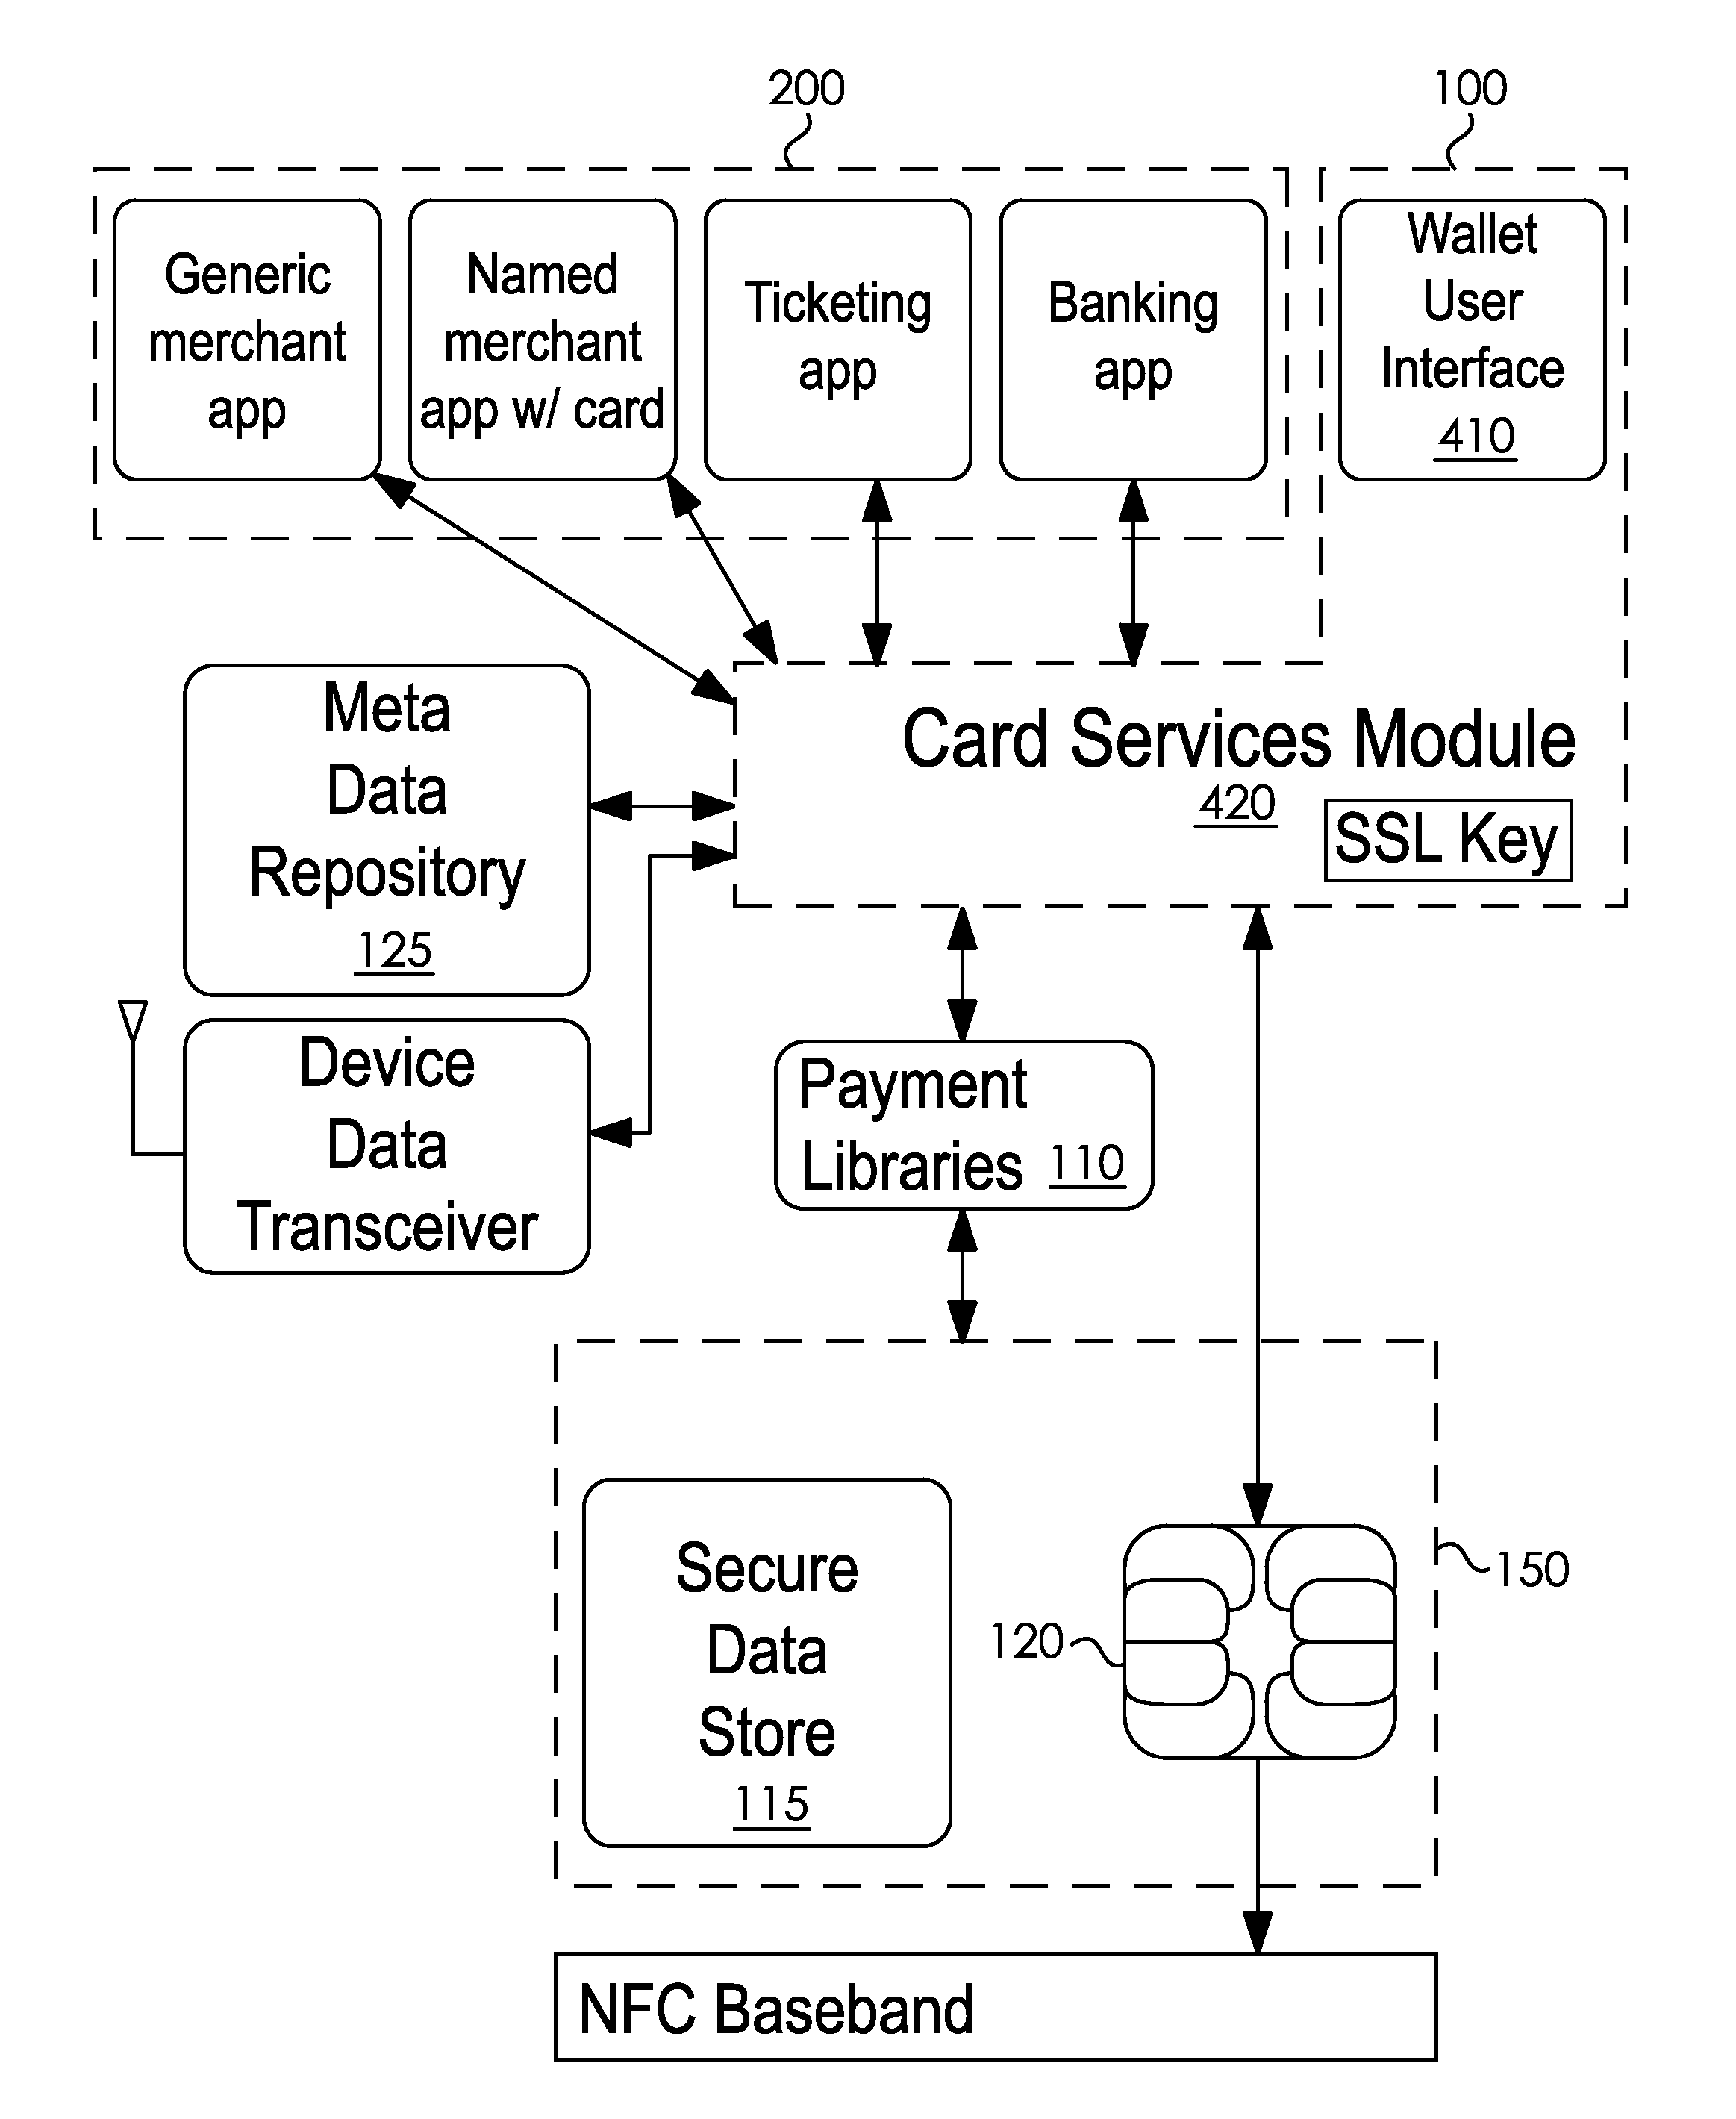 System and Method for Providing Secure Data Communication Functionality to a Variety of Applications on a Portable Communication Device